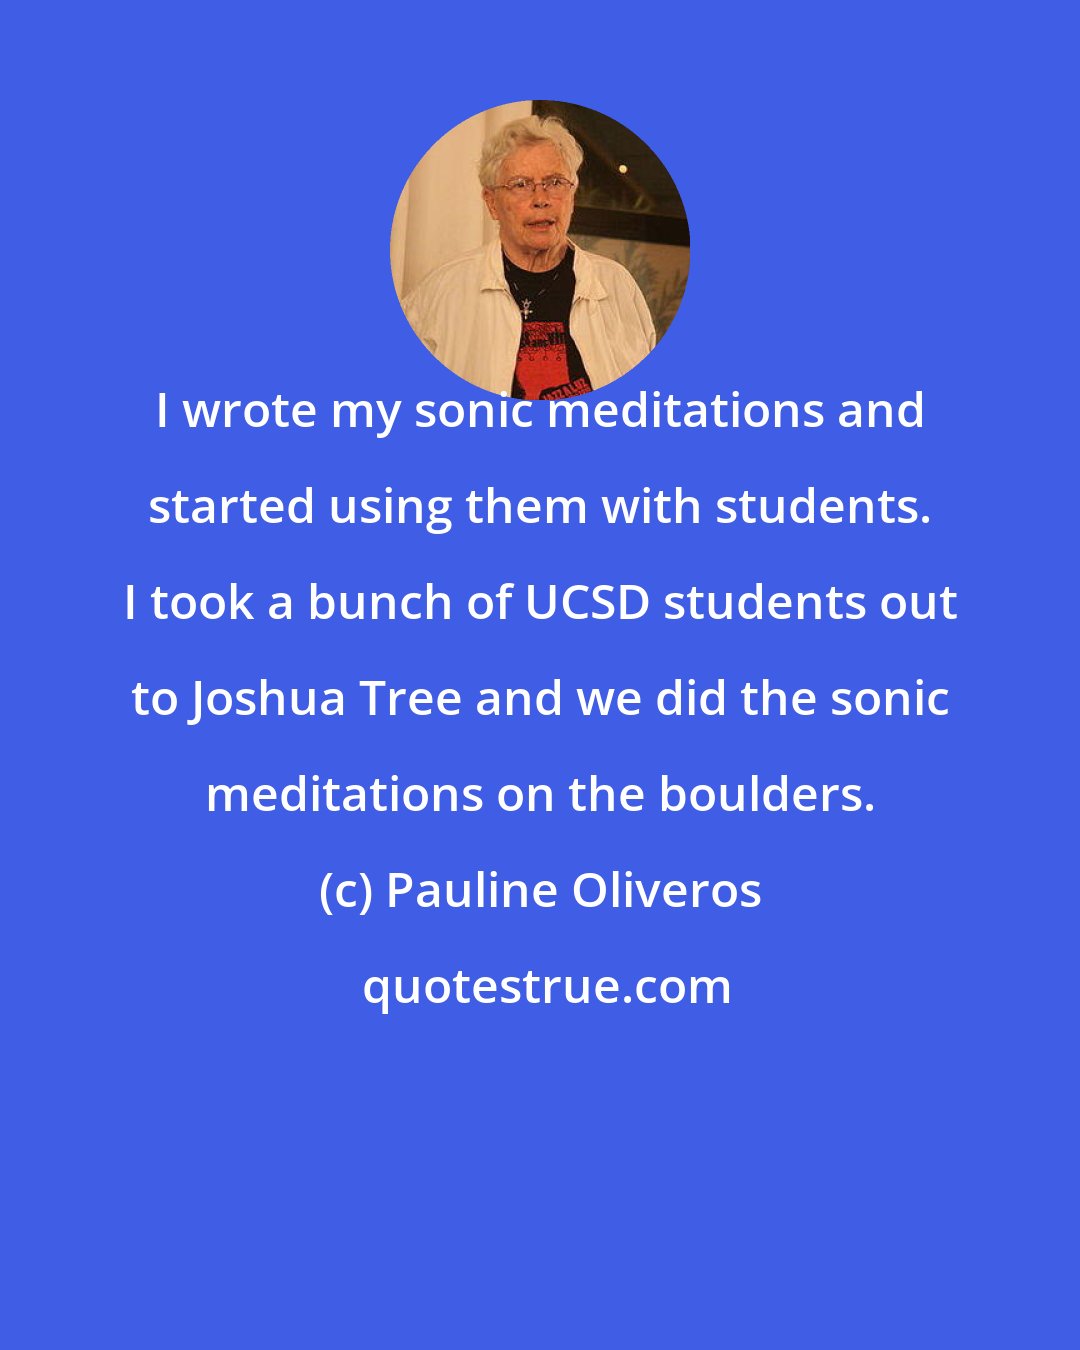 Pauline Oliveros: I wrote my sonic meditations and started using them with students. I took a bunch of UCSD students out to Joshua Tree and we did the sonic meditations on the boulders.